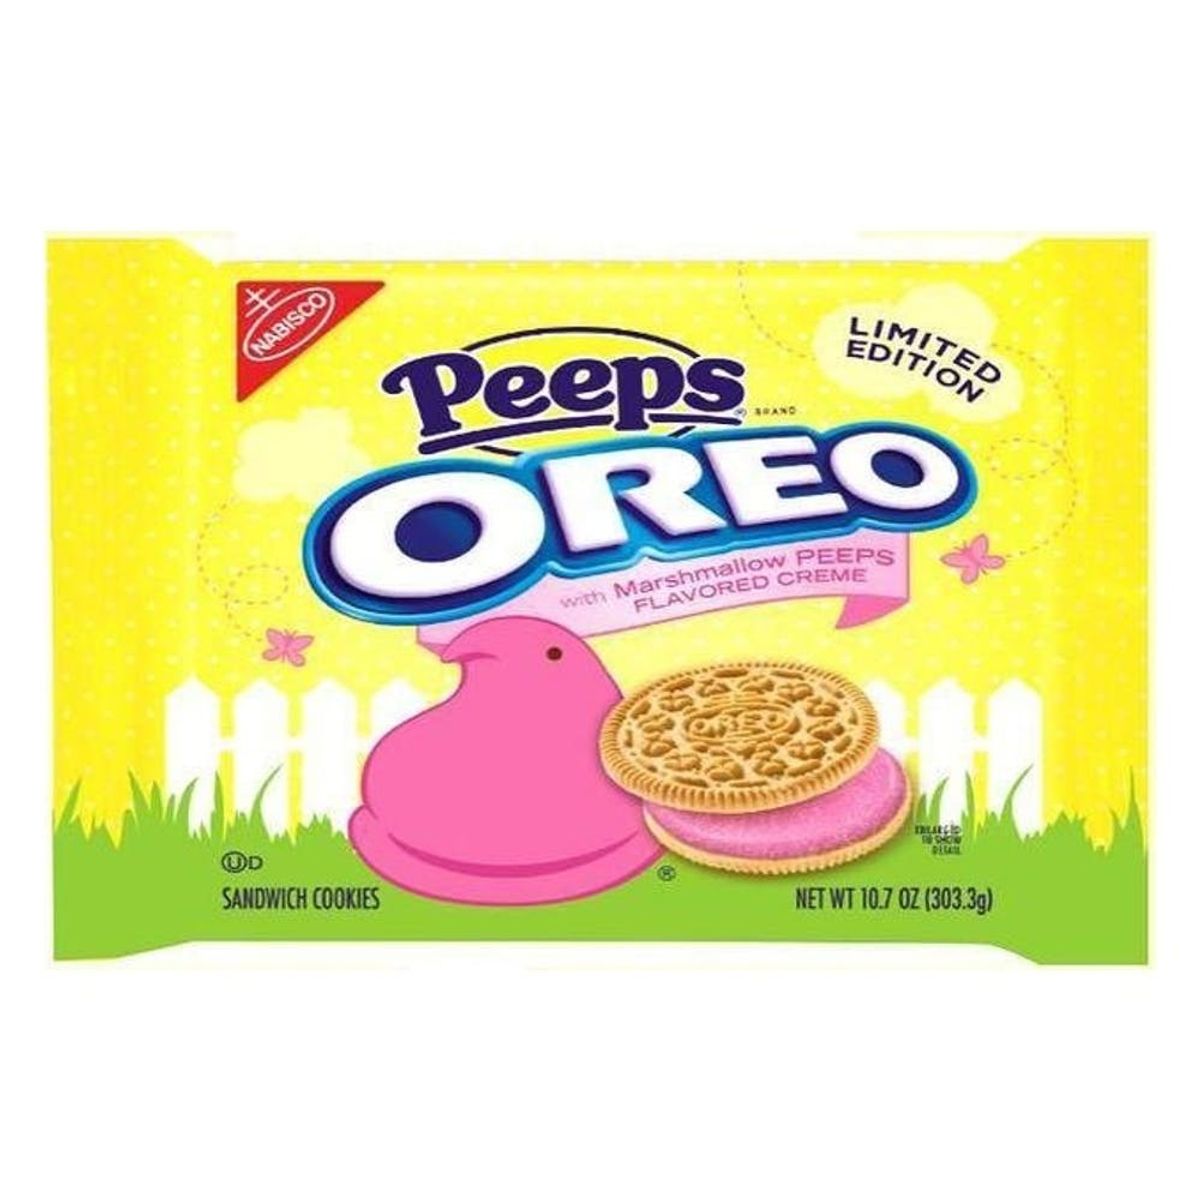 This Is the Weird (and Rather Unpleasant) Side Effect of Eating Peeps Oreos